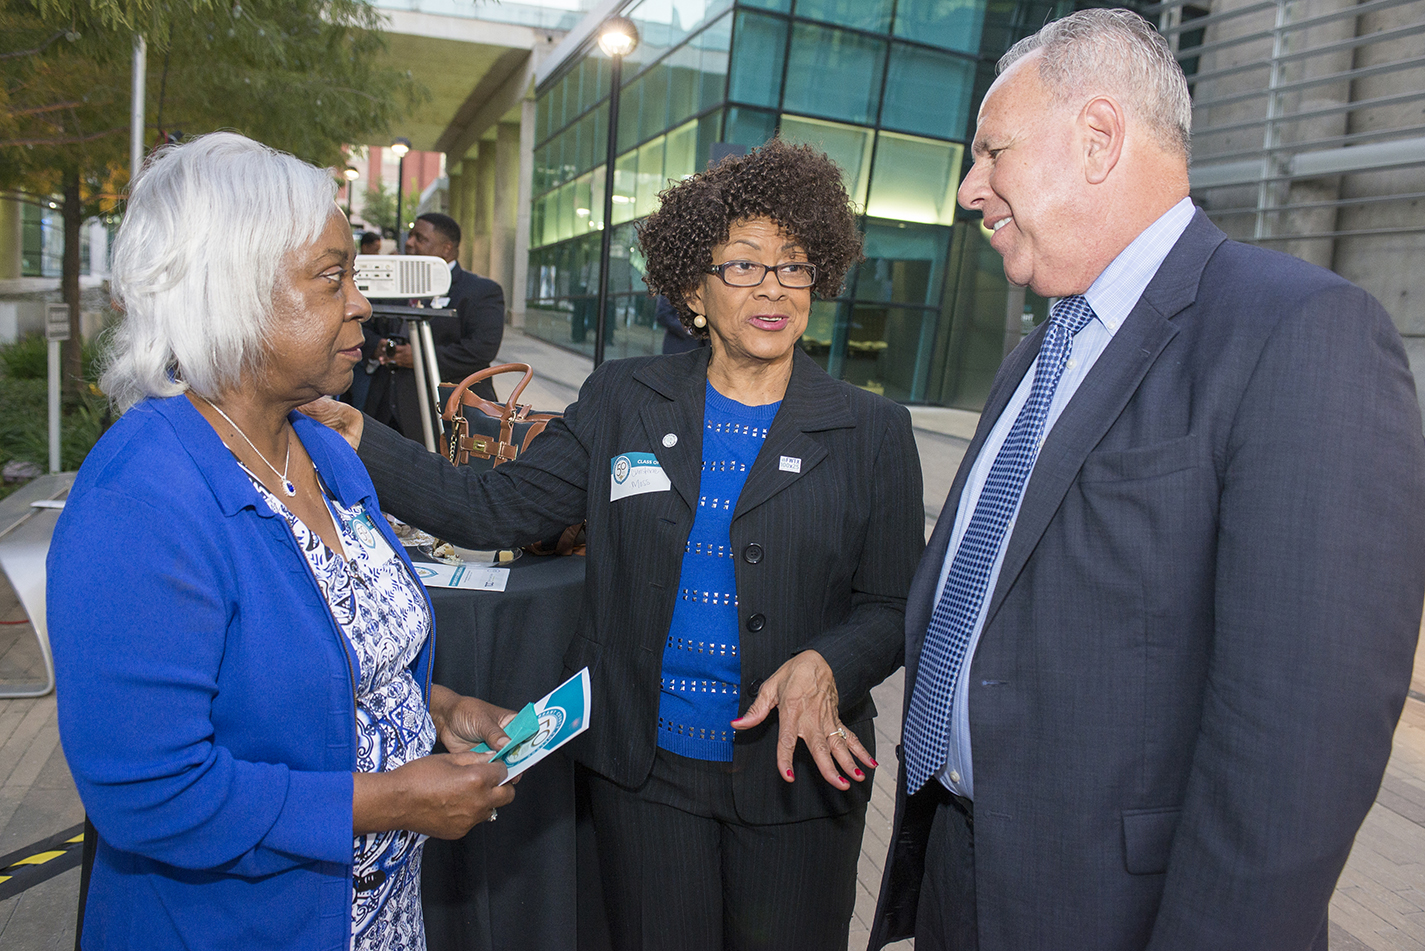 Chancellor Eugene Giovannini speaks with two former nursing students, Glenda Sturges (left) and Christine Moss (center), from the program’s first class during the program’s golden anniversary celebration Oct. 12 on TR East Campus.